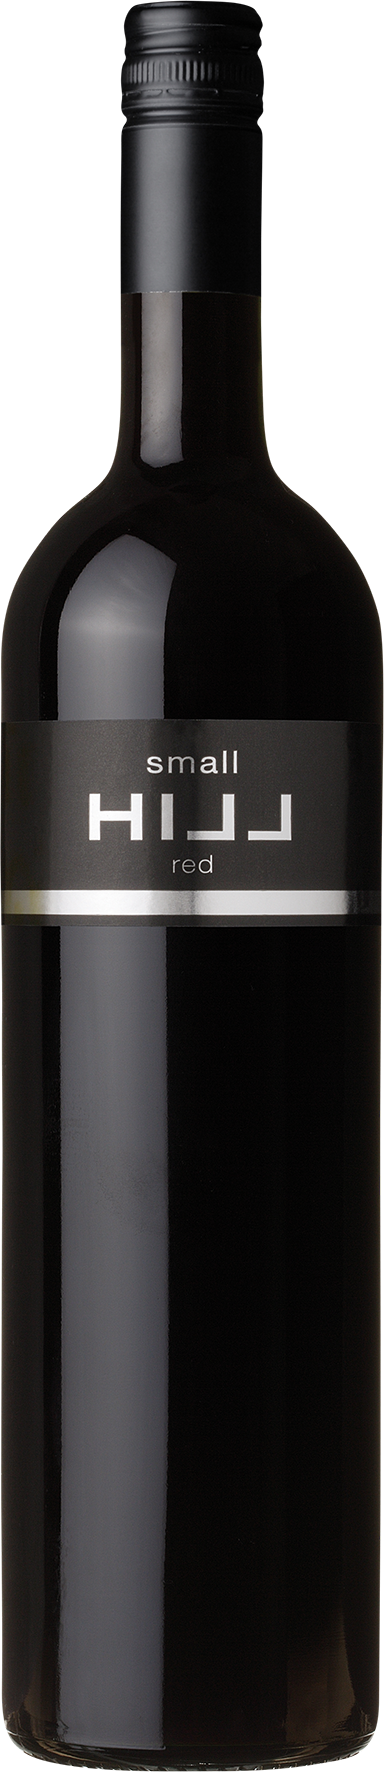 Small Red Hill 2020 0,75 l** - (7/14)